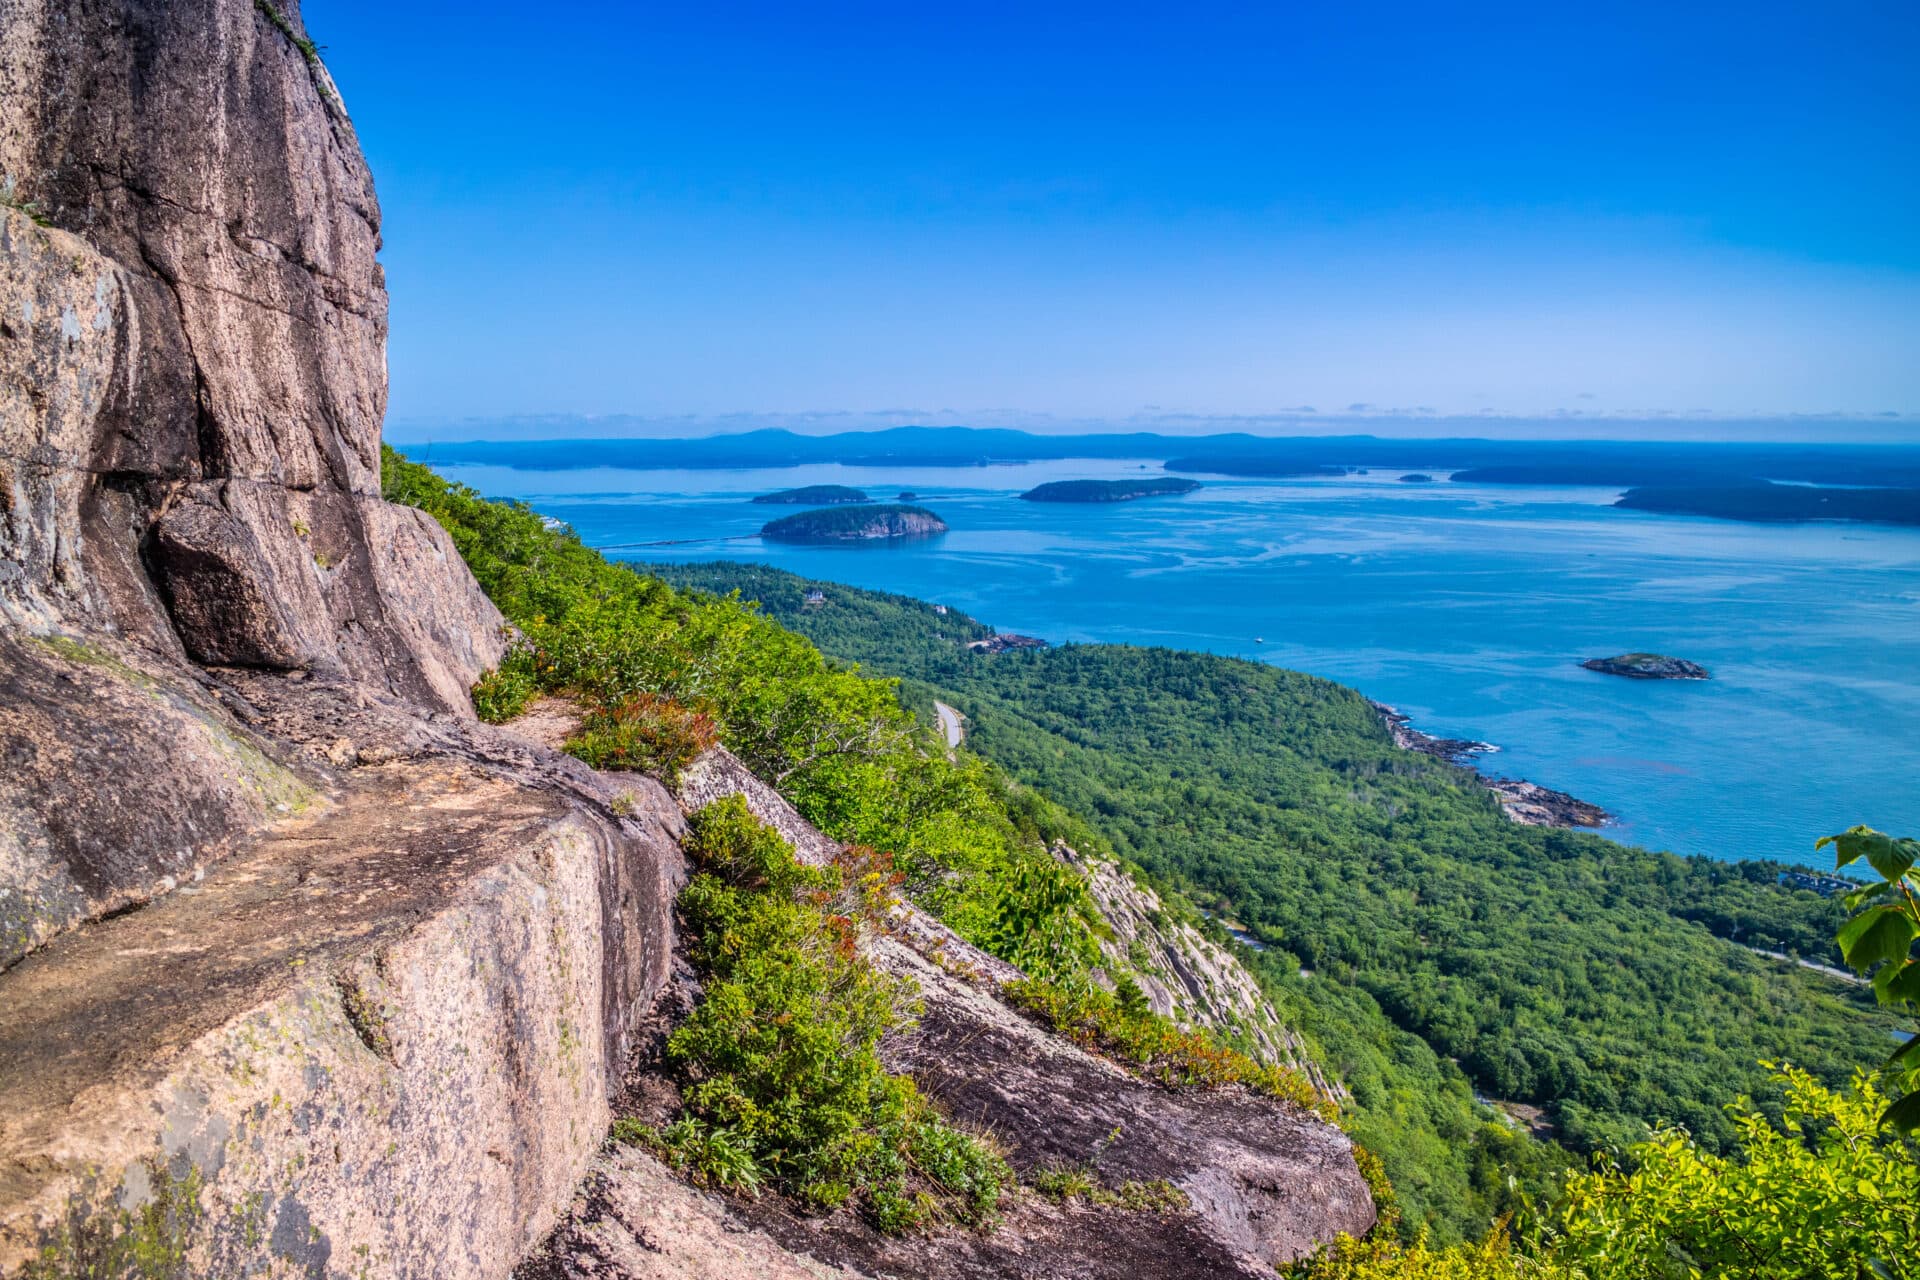 Plan your trip to Acadia National Park Roadtrippers